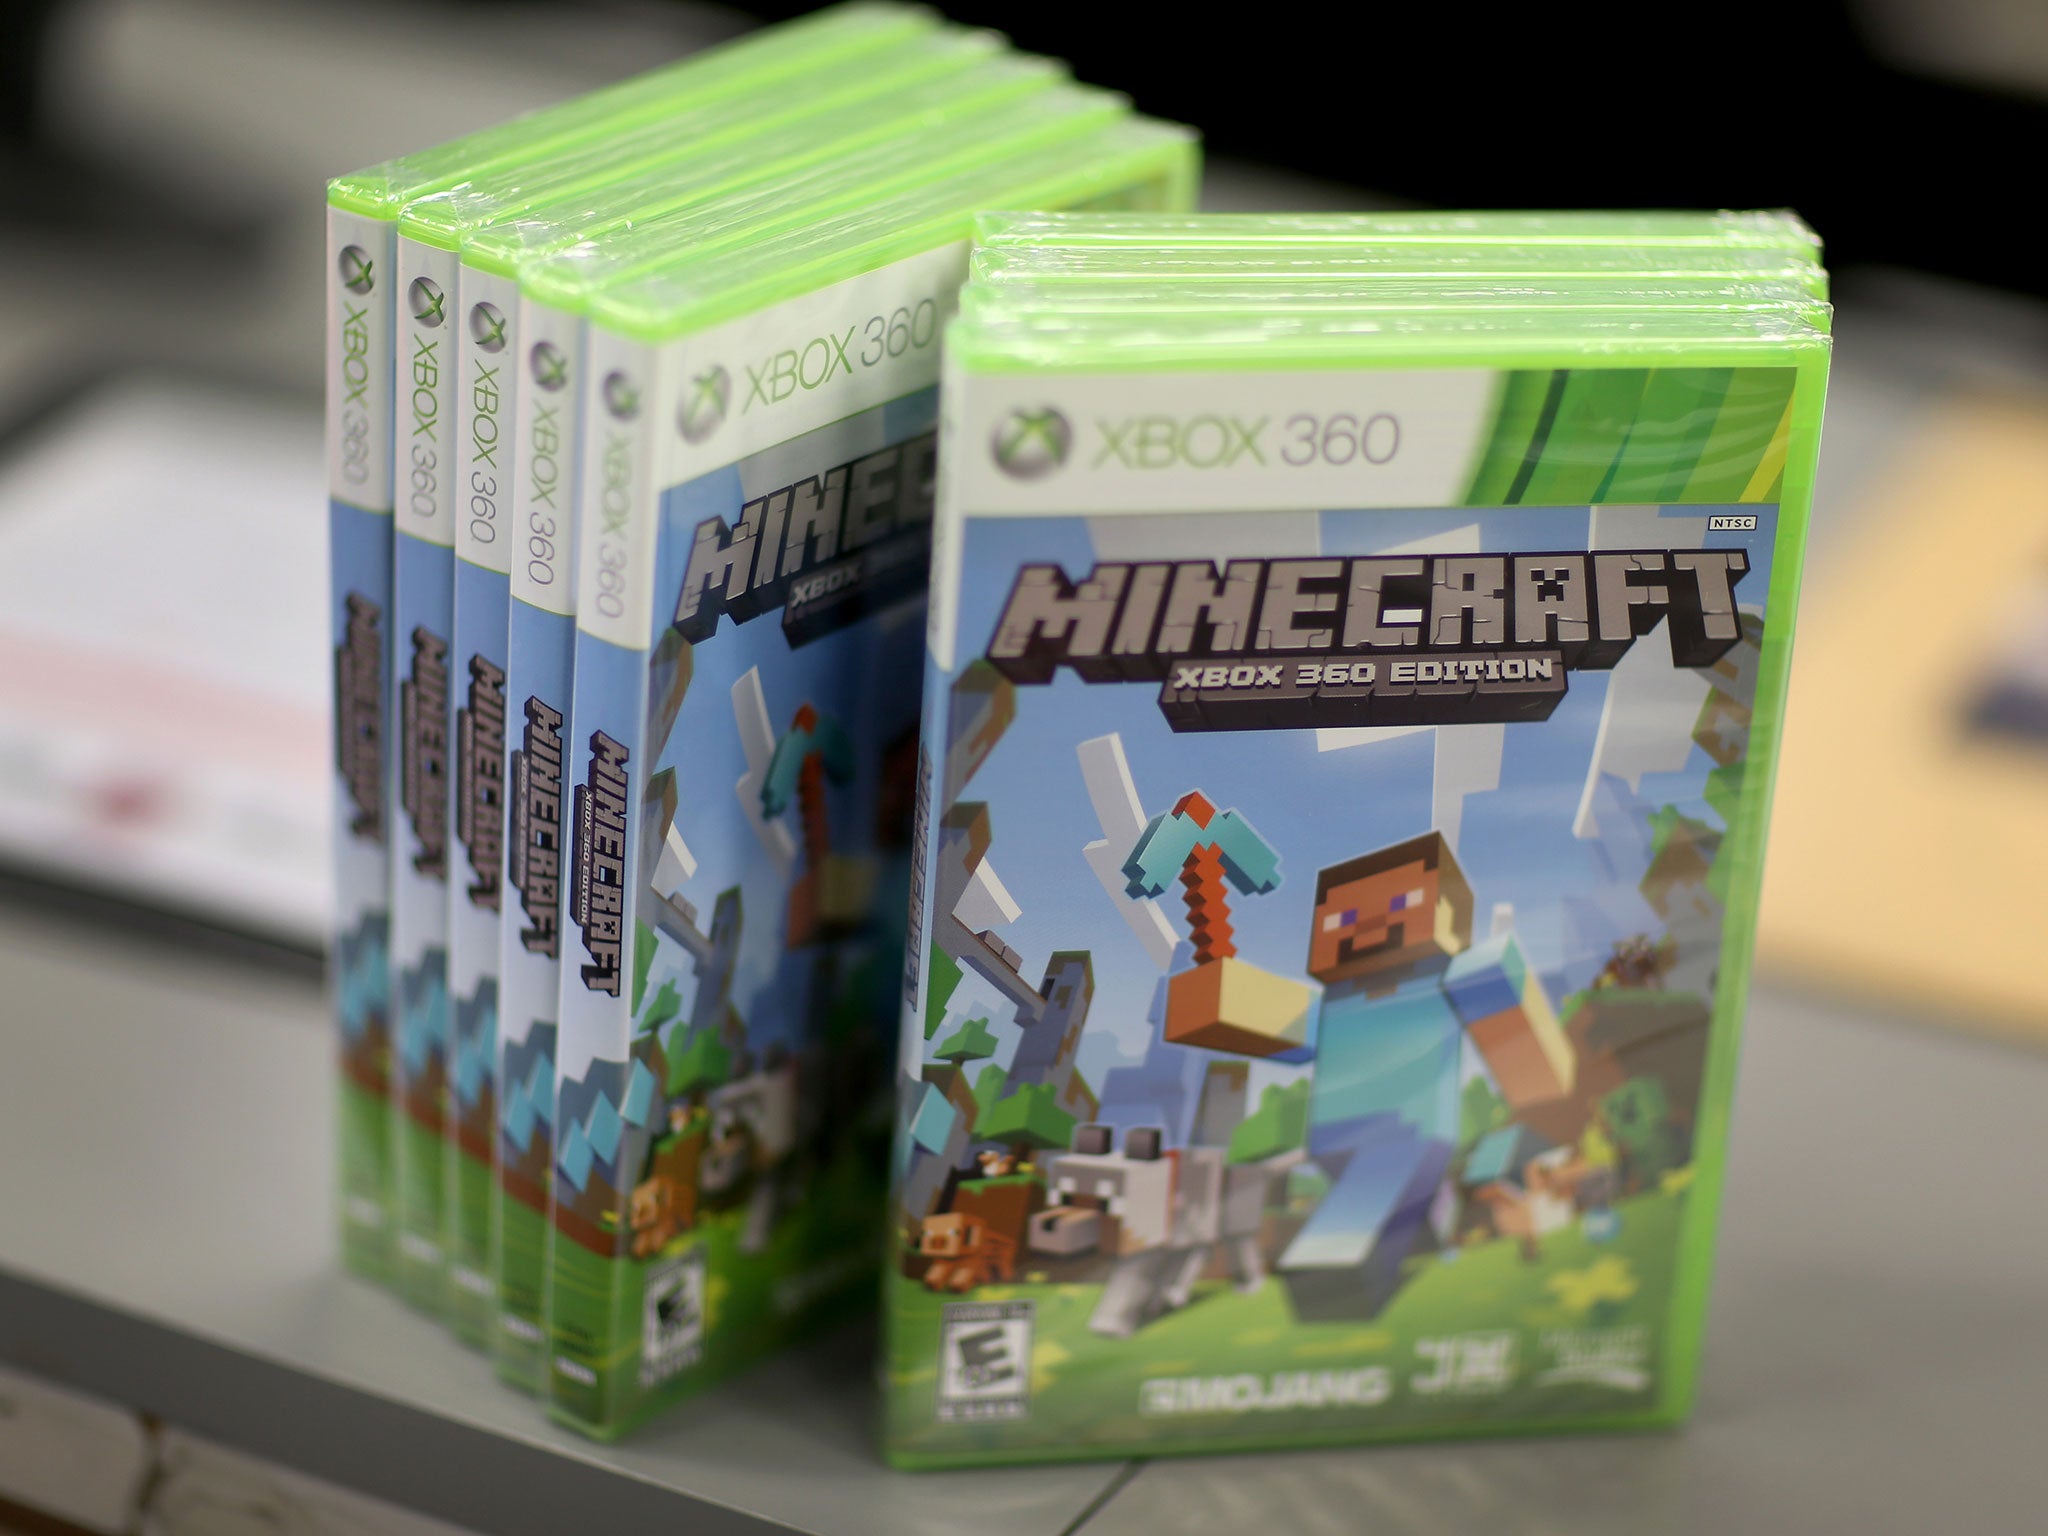 Minecraft already has several books, 42 million YouTube videos, a soundtrack and countless blogs dedicated to it